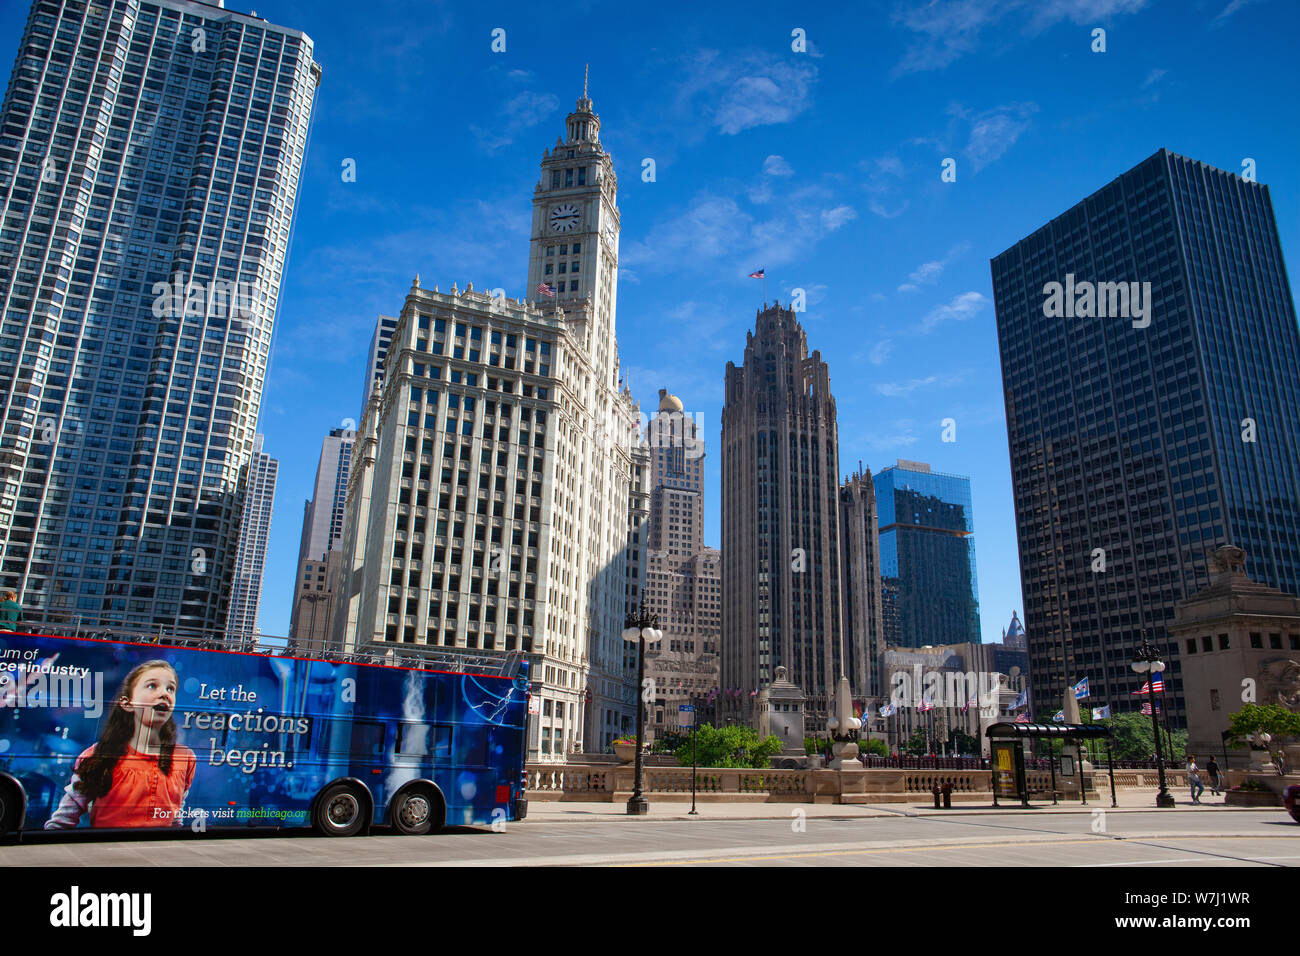 Chicago, IL, USA - July 13,2013:  Wrigley building in Chicago on July 13, 2013. The Wrigley Building is a skyscraper  with two towers (South Tower and Stock Photo